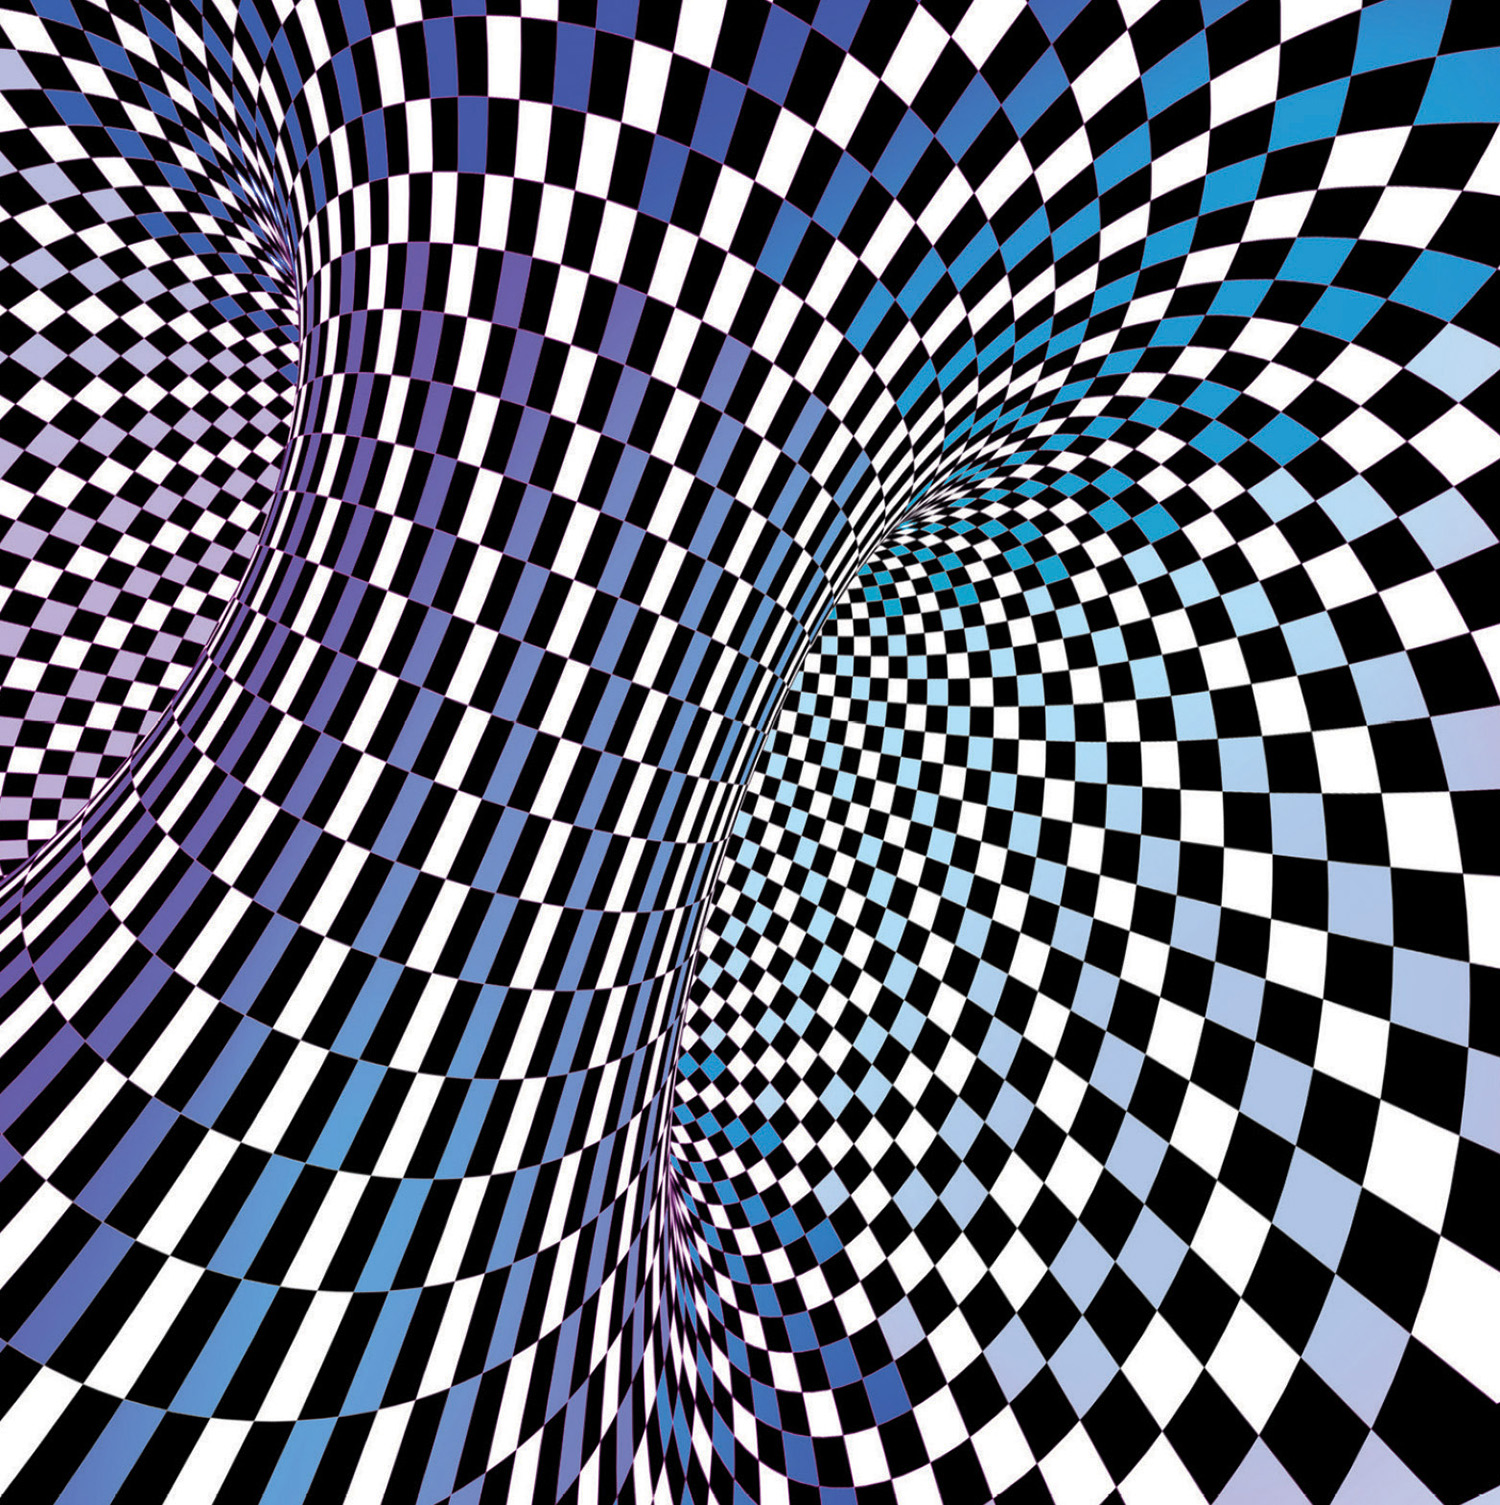 3D spiral with vortex in blue, white and black